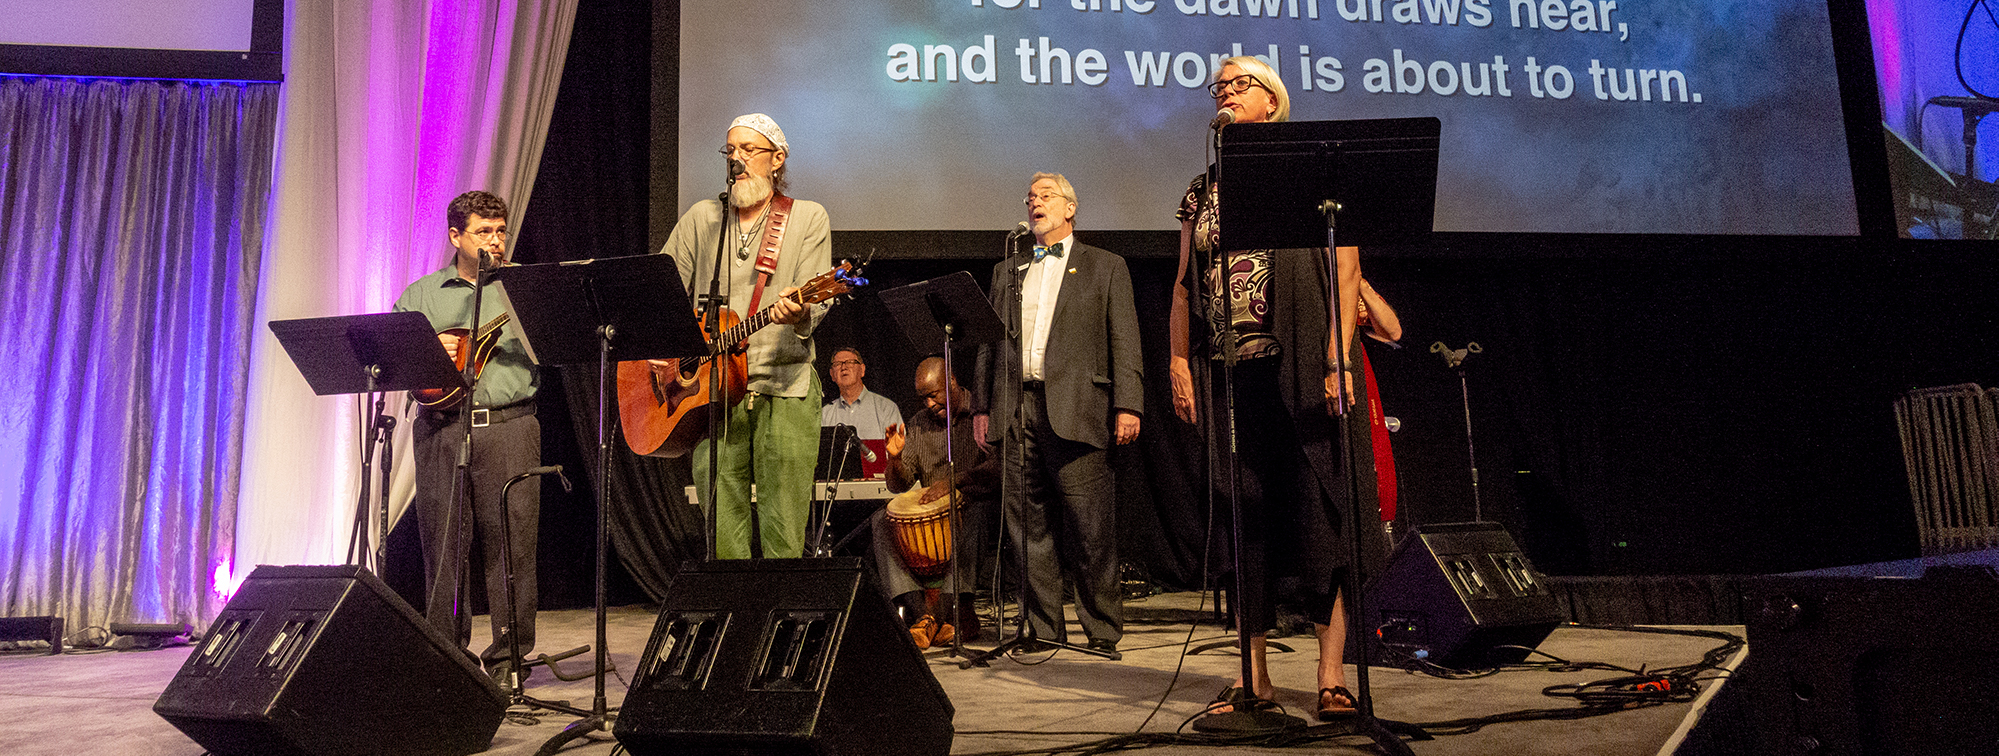 Chip Andrus (second from the left) performs at GA223 with (left to right) David Gambrell, Sheldon Sorge, Alonzo Johnson, Bill McConnell and Deb Avery. Photo by: Gregg Brekke.